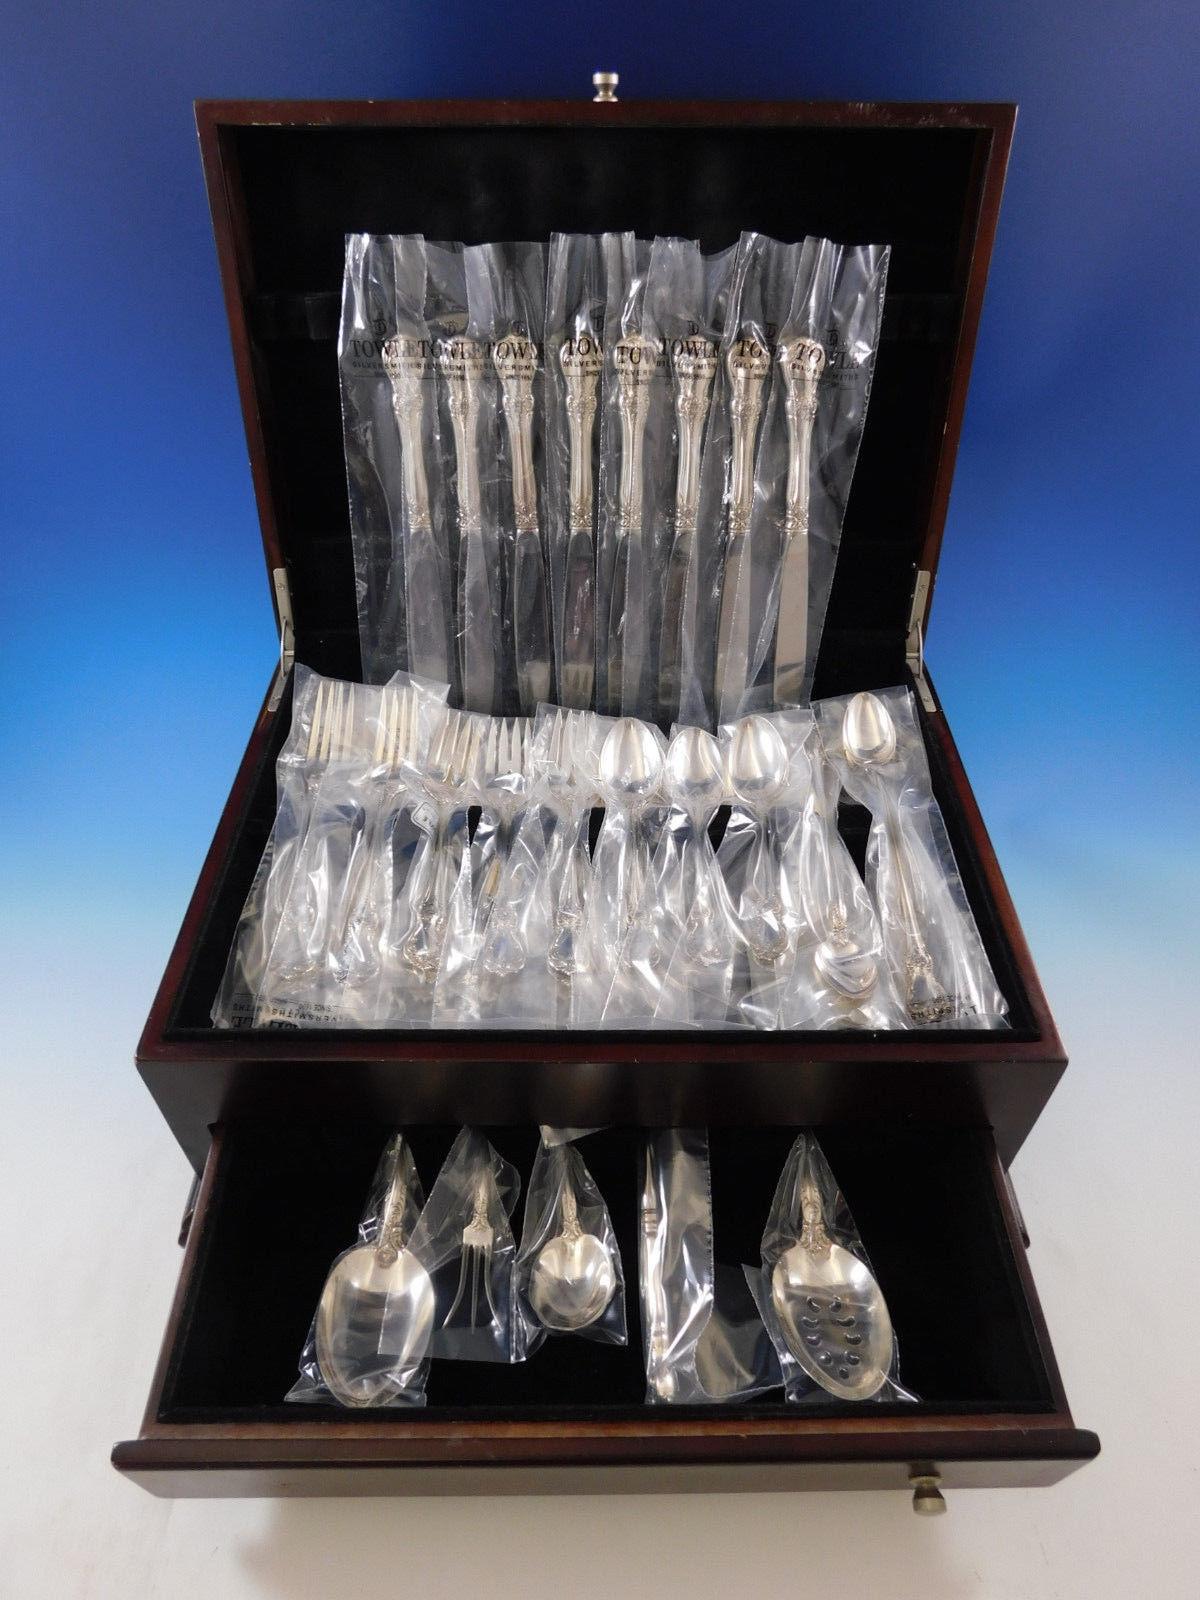 New in factory sleeves old master by Towle sterling silver flatware set, 45 pieces. This set includes:

Eight knives, 8 3/4